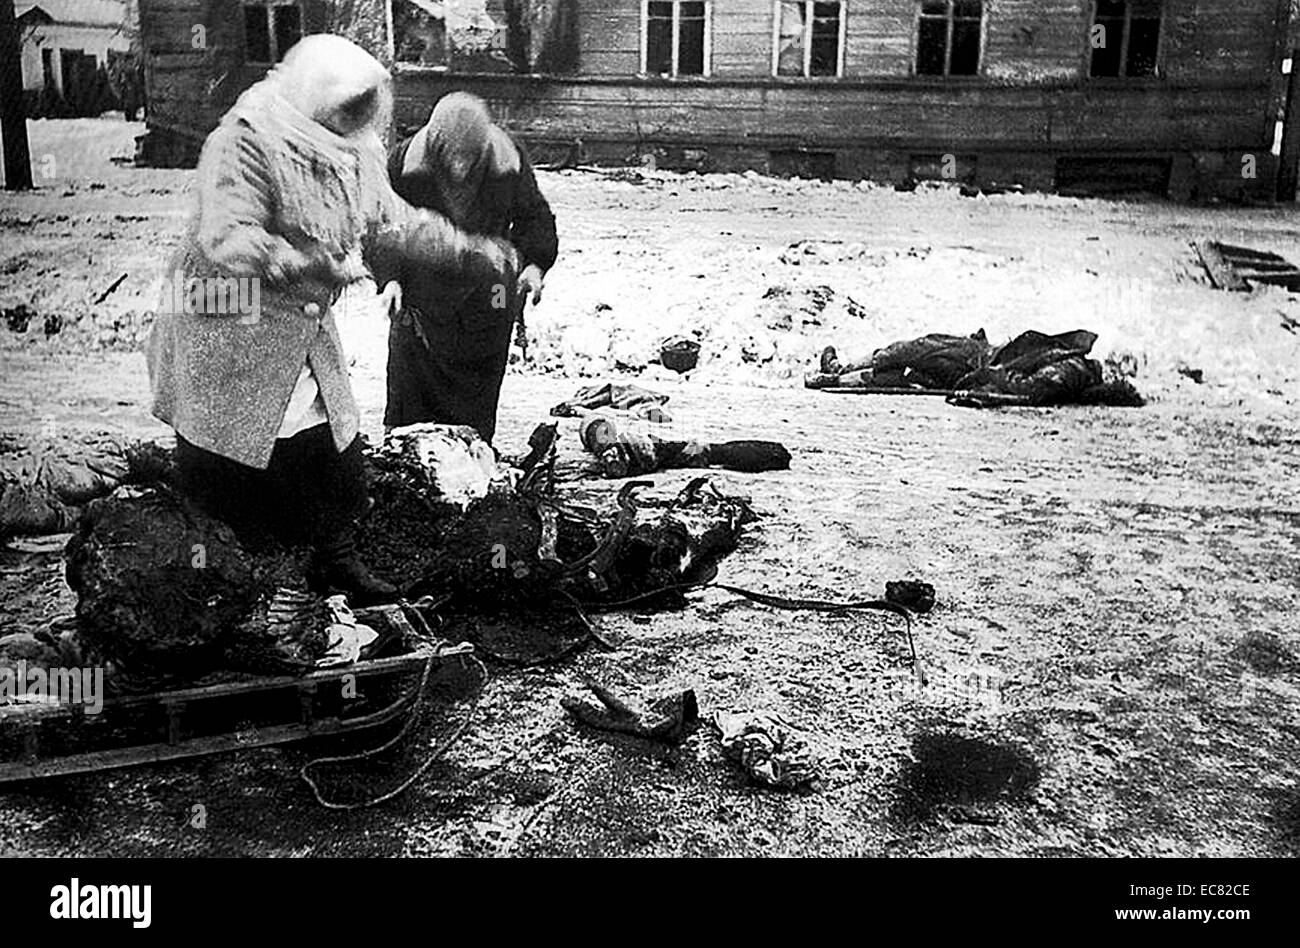 Two female figures collect the remains of a dead horse for food, during the Siege of Leningrad. Germans attacked Leningrad during the Second World War which resulted in mass destruction and poverty 1941. Stock Photo